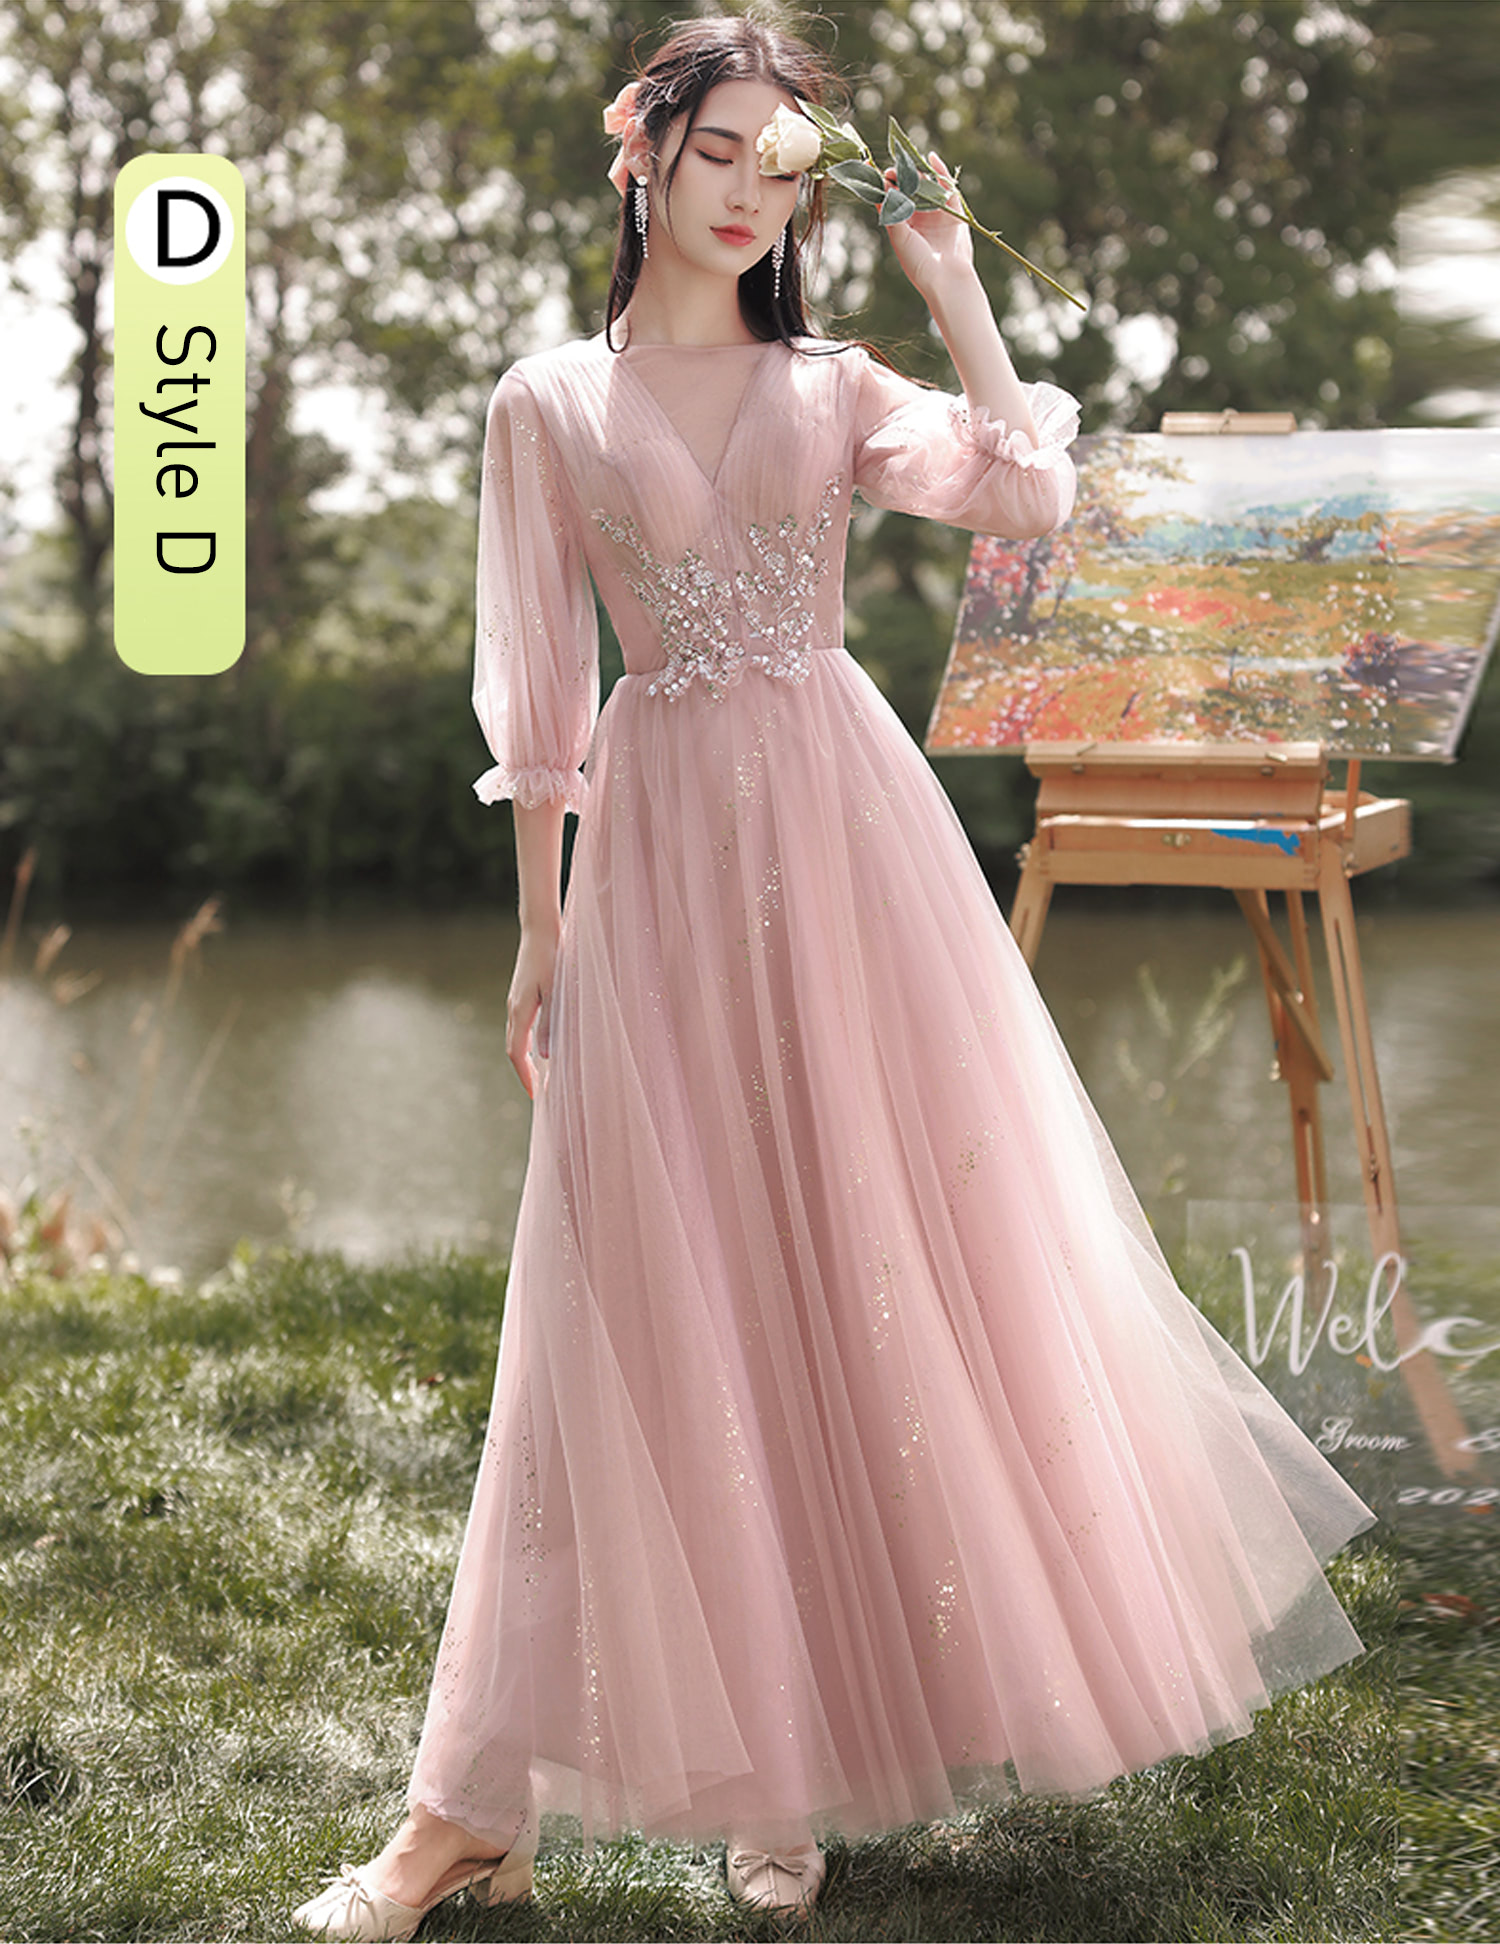 Romantic-Pink-Bridal-Party-Dress-Elegant-Occasions-Formal-Gown24.jpg